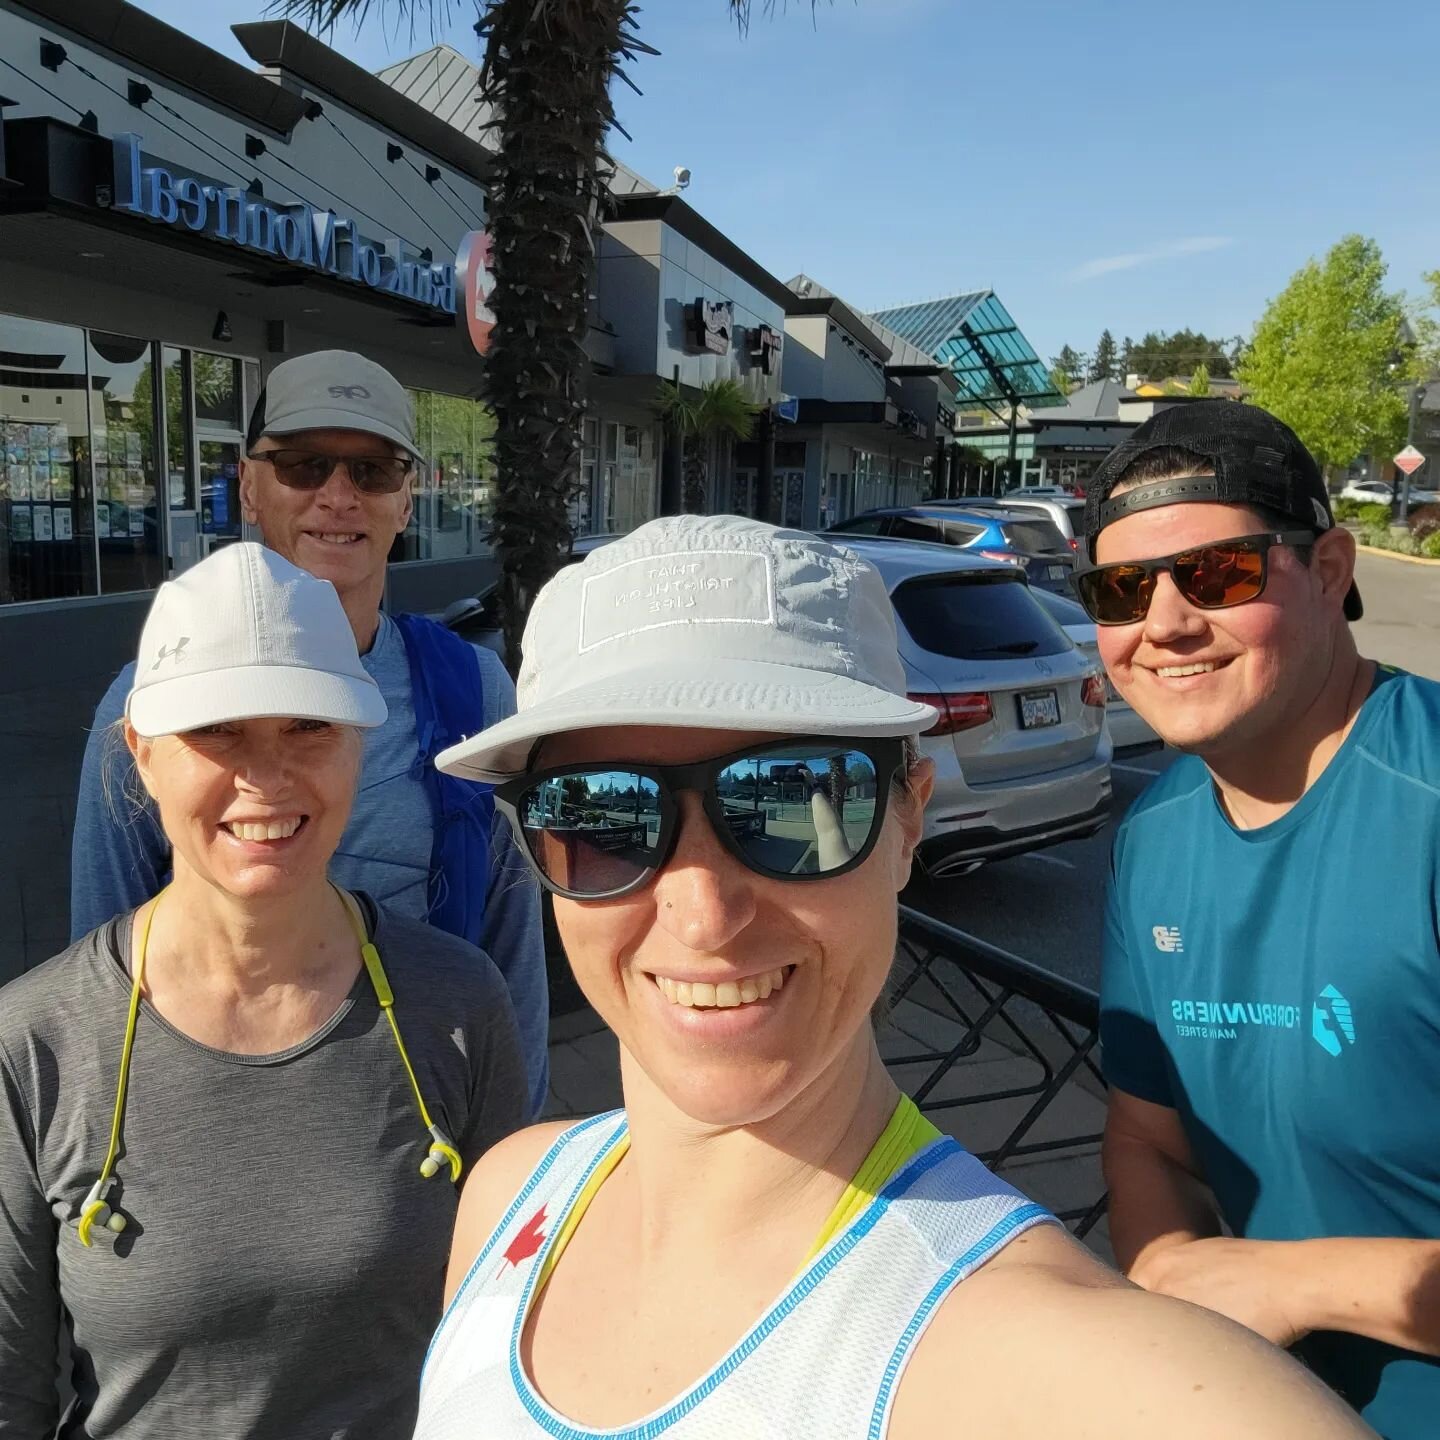 Our runs are back! It's so nice to be our running with other people and chatting away the kms.
.
Keep an eye on your emails and the club calendar for the location of our next run. Link in bio.
.
#ClubRun #SundayRunday #TraithlonTraining #SunnyRun